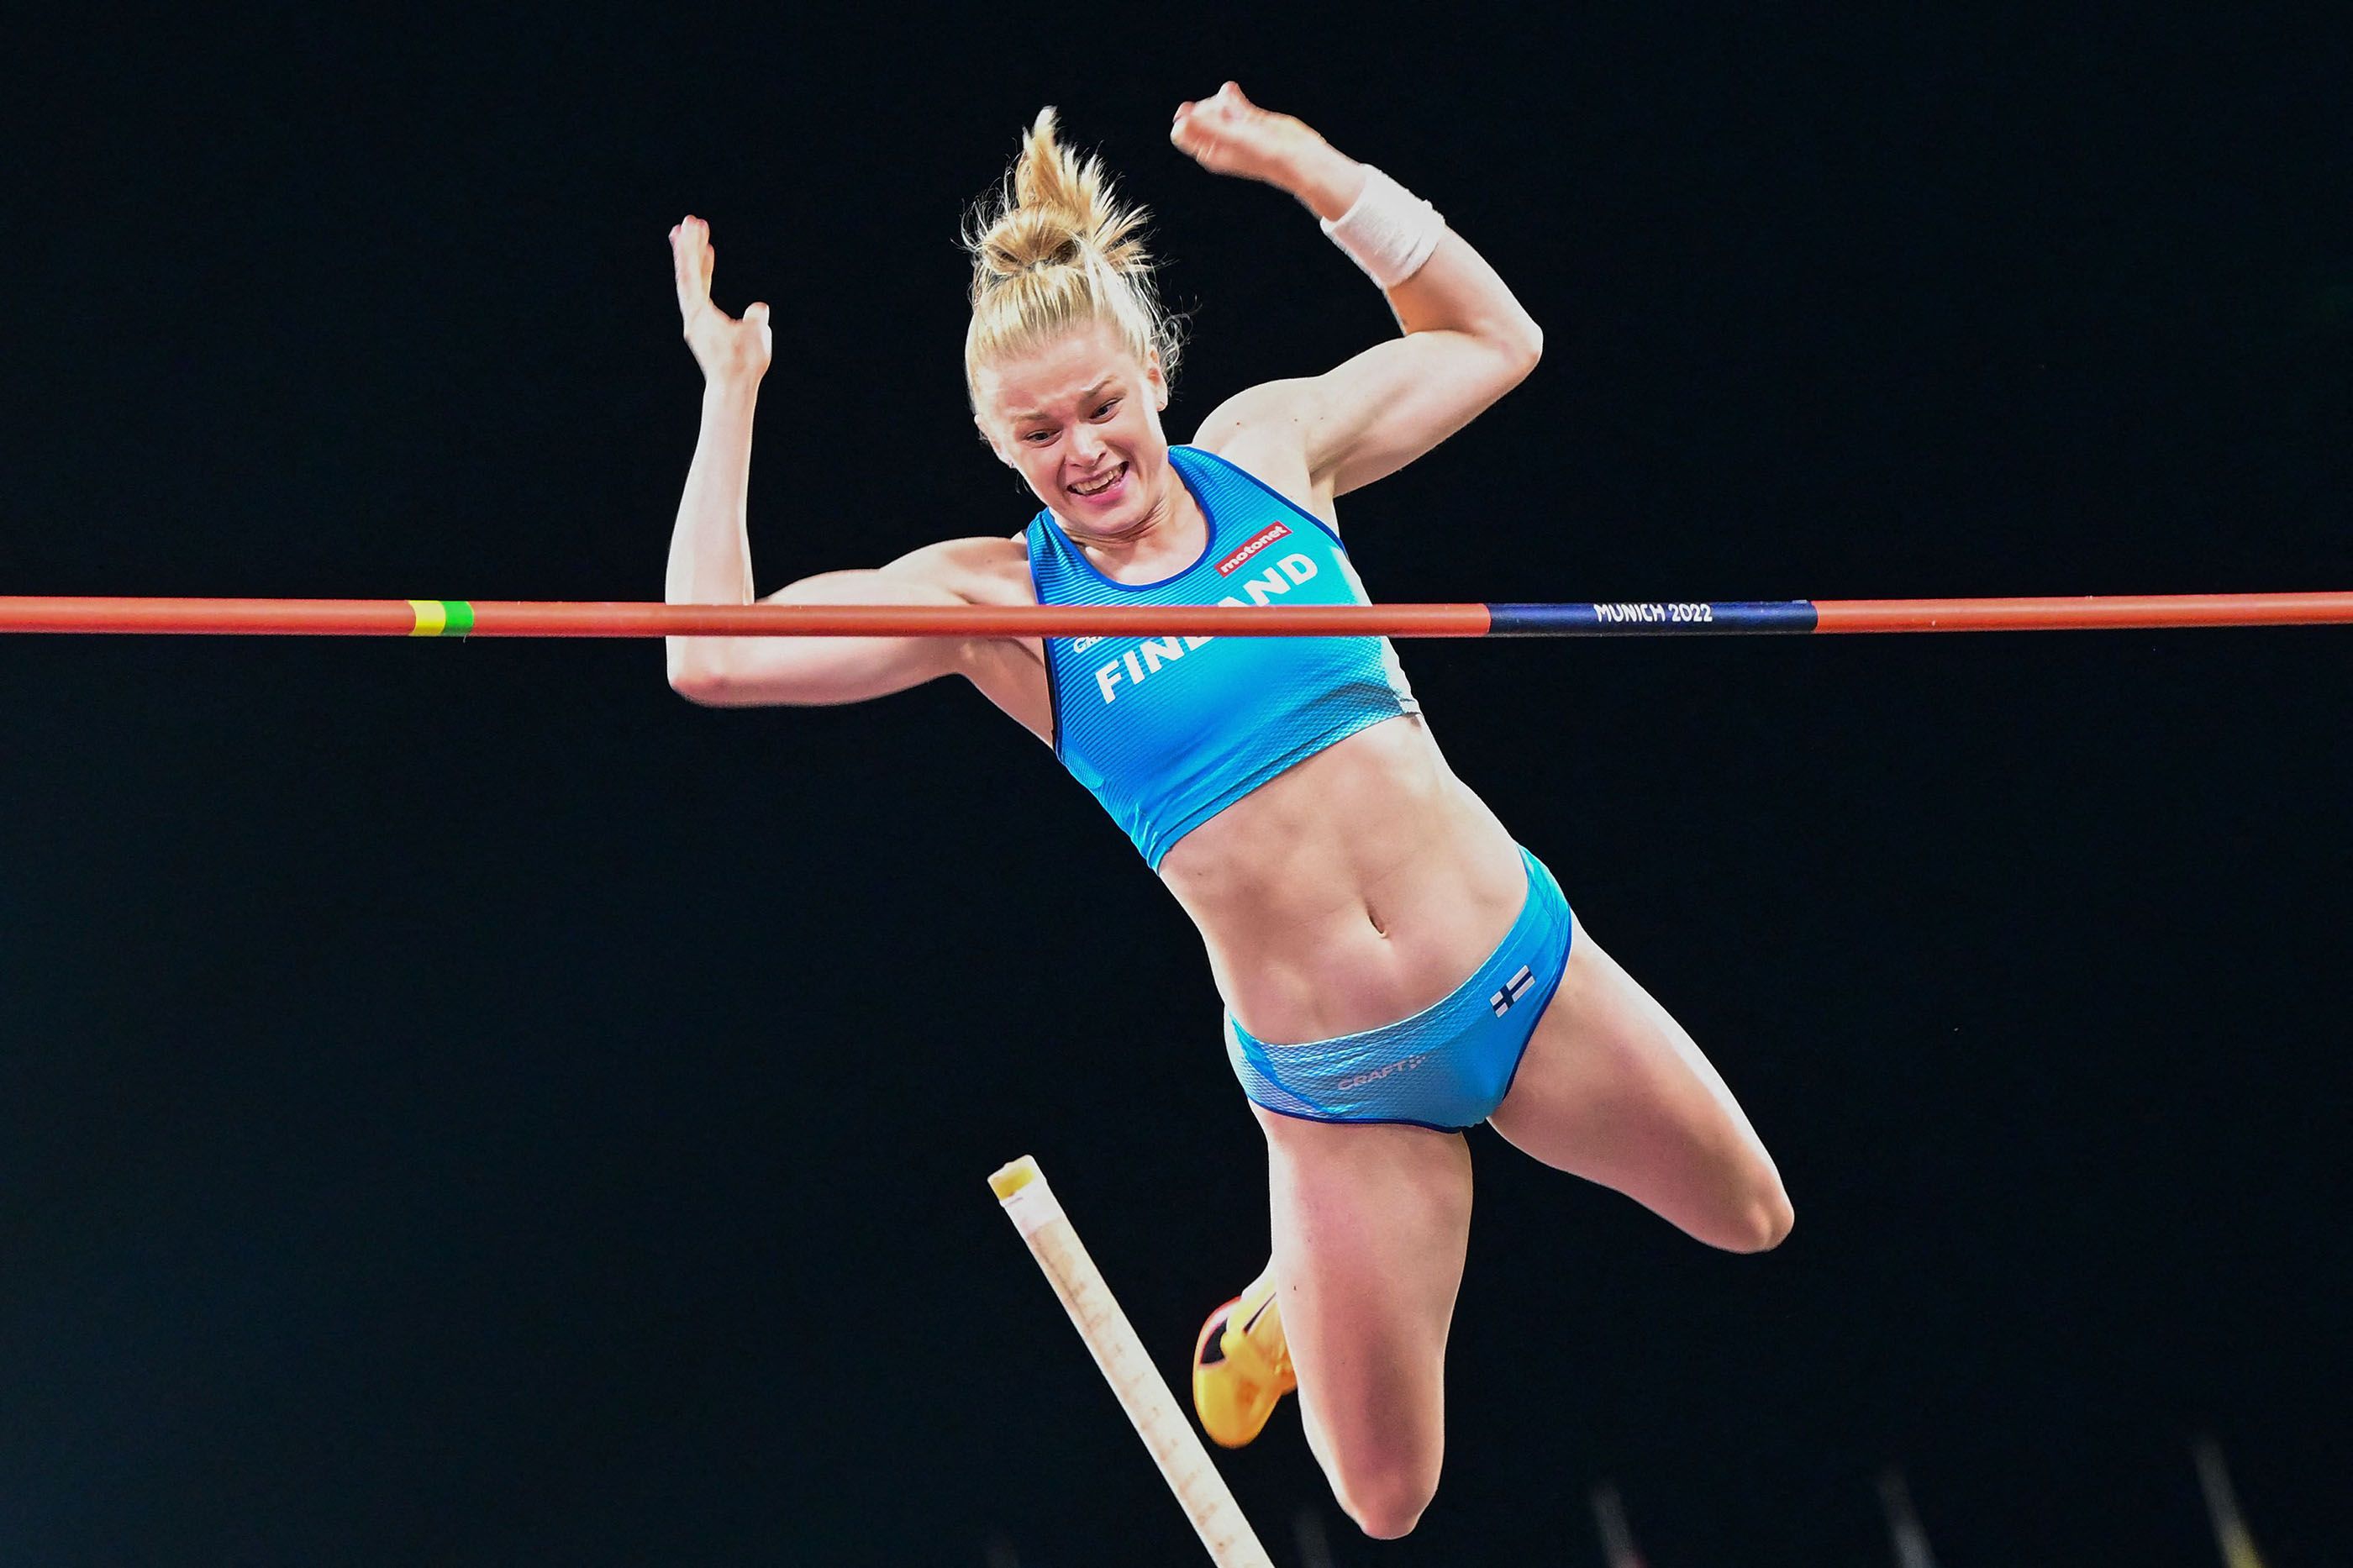 Wilma Murto in the pole vault final at the European Championships in Munich